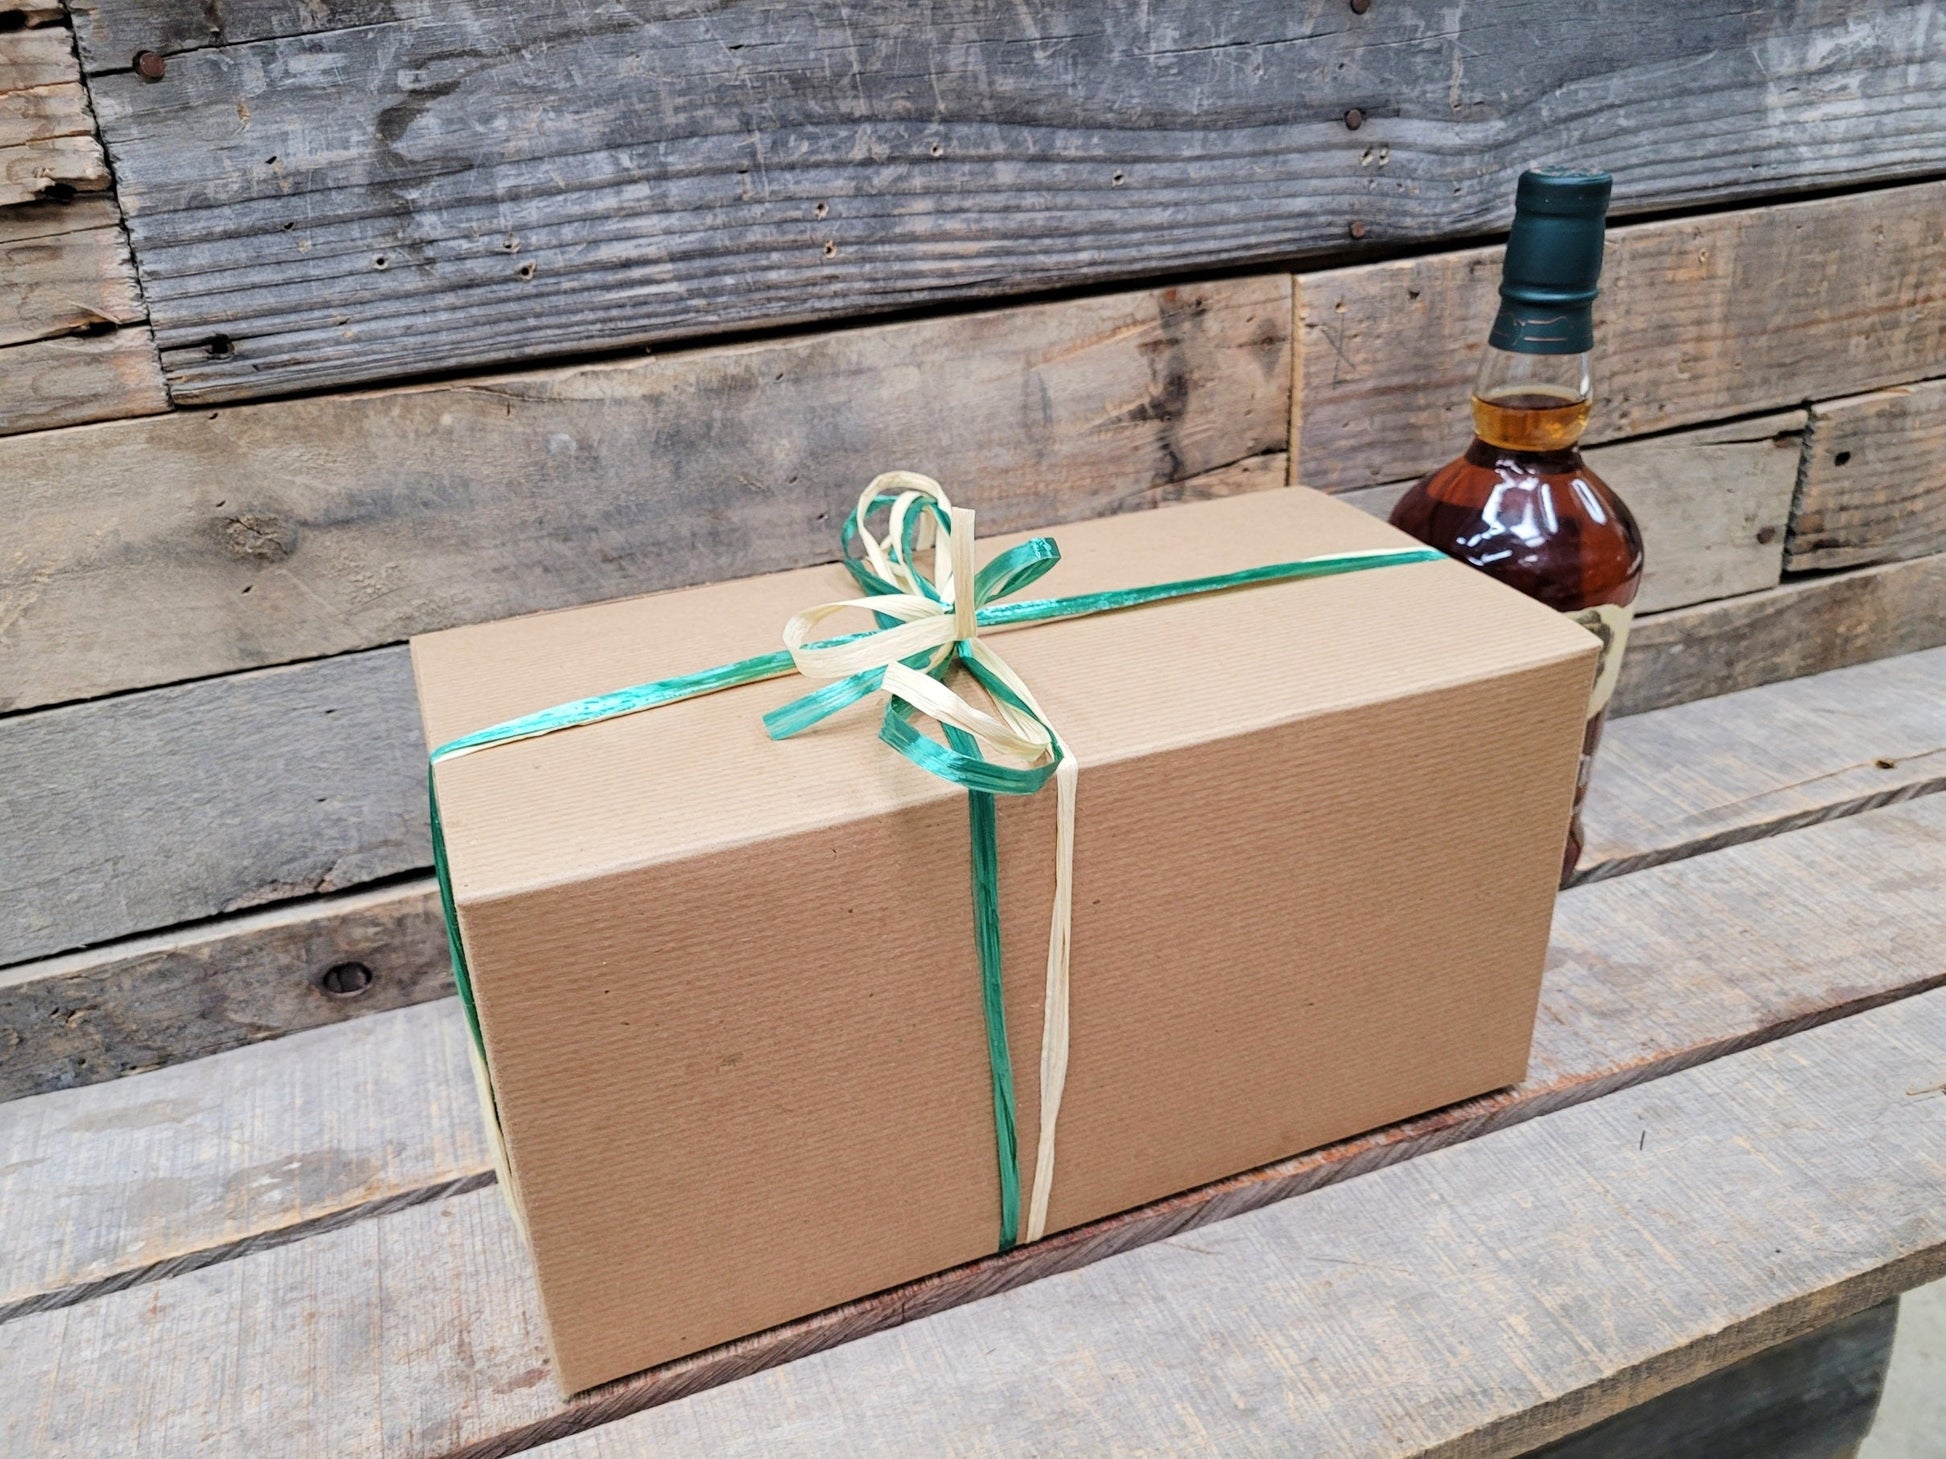 SALE! Wine Barrel Chunks - BBQ Box from Napa wine barrels - Gift Packaged. 100% Recycled!